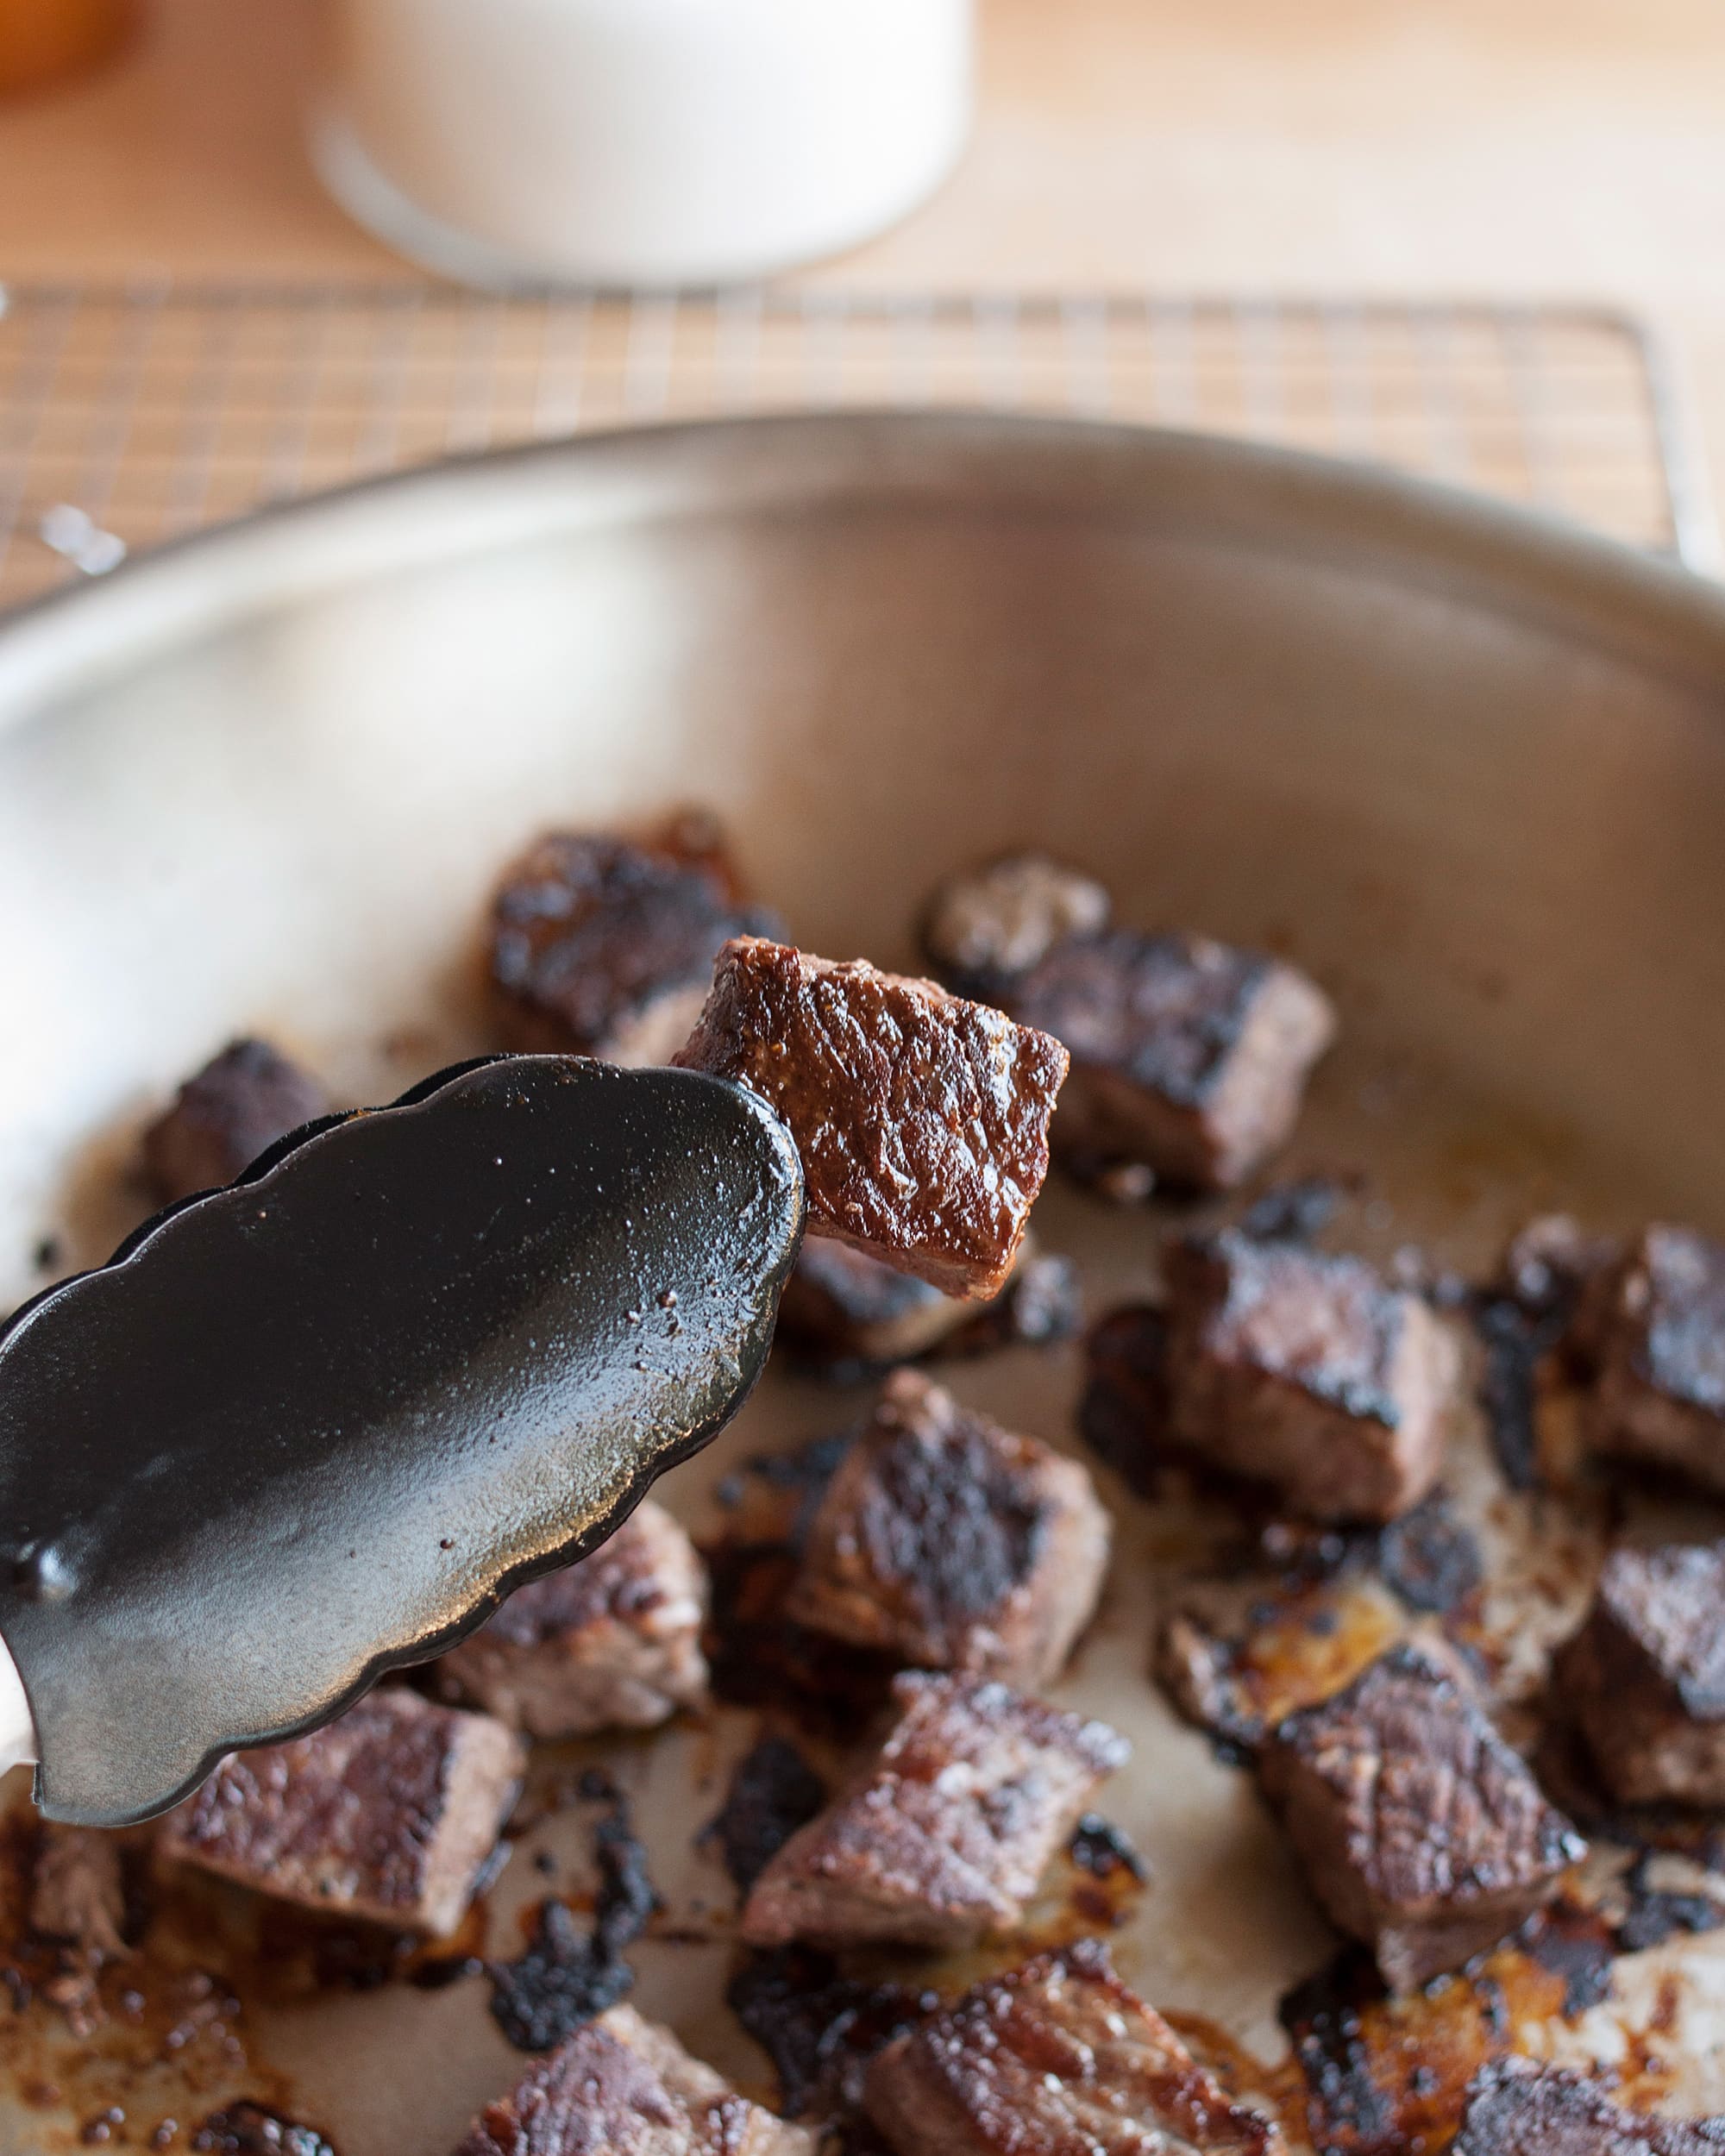 Kitchen Tip: How to Pan Sear and Sauté